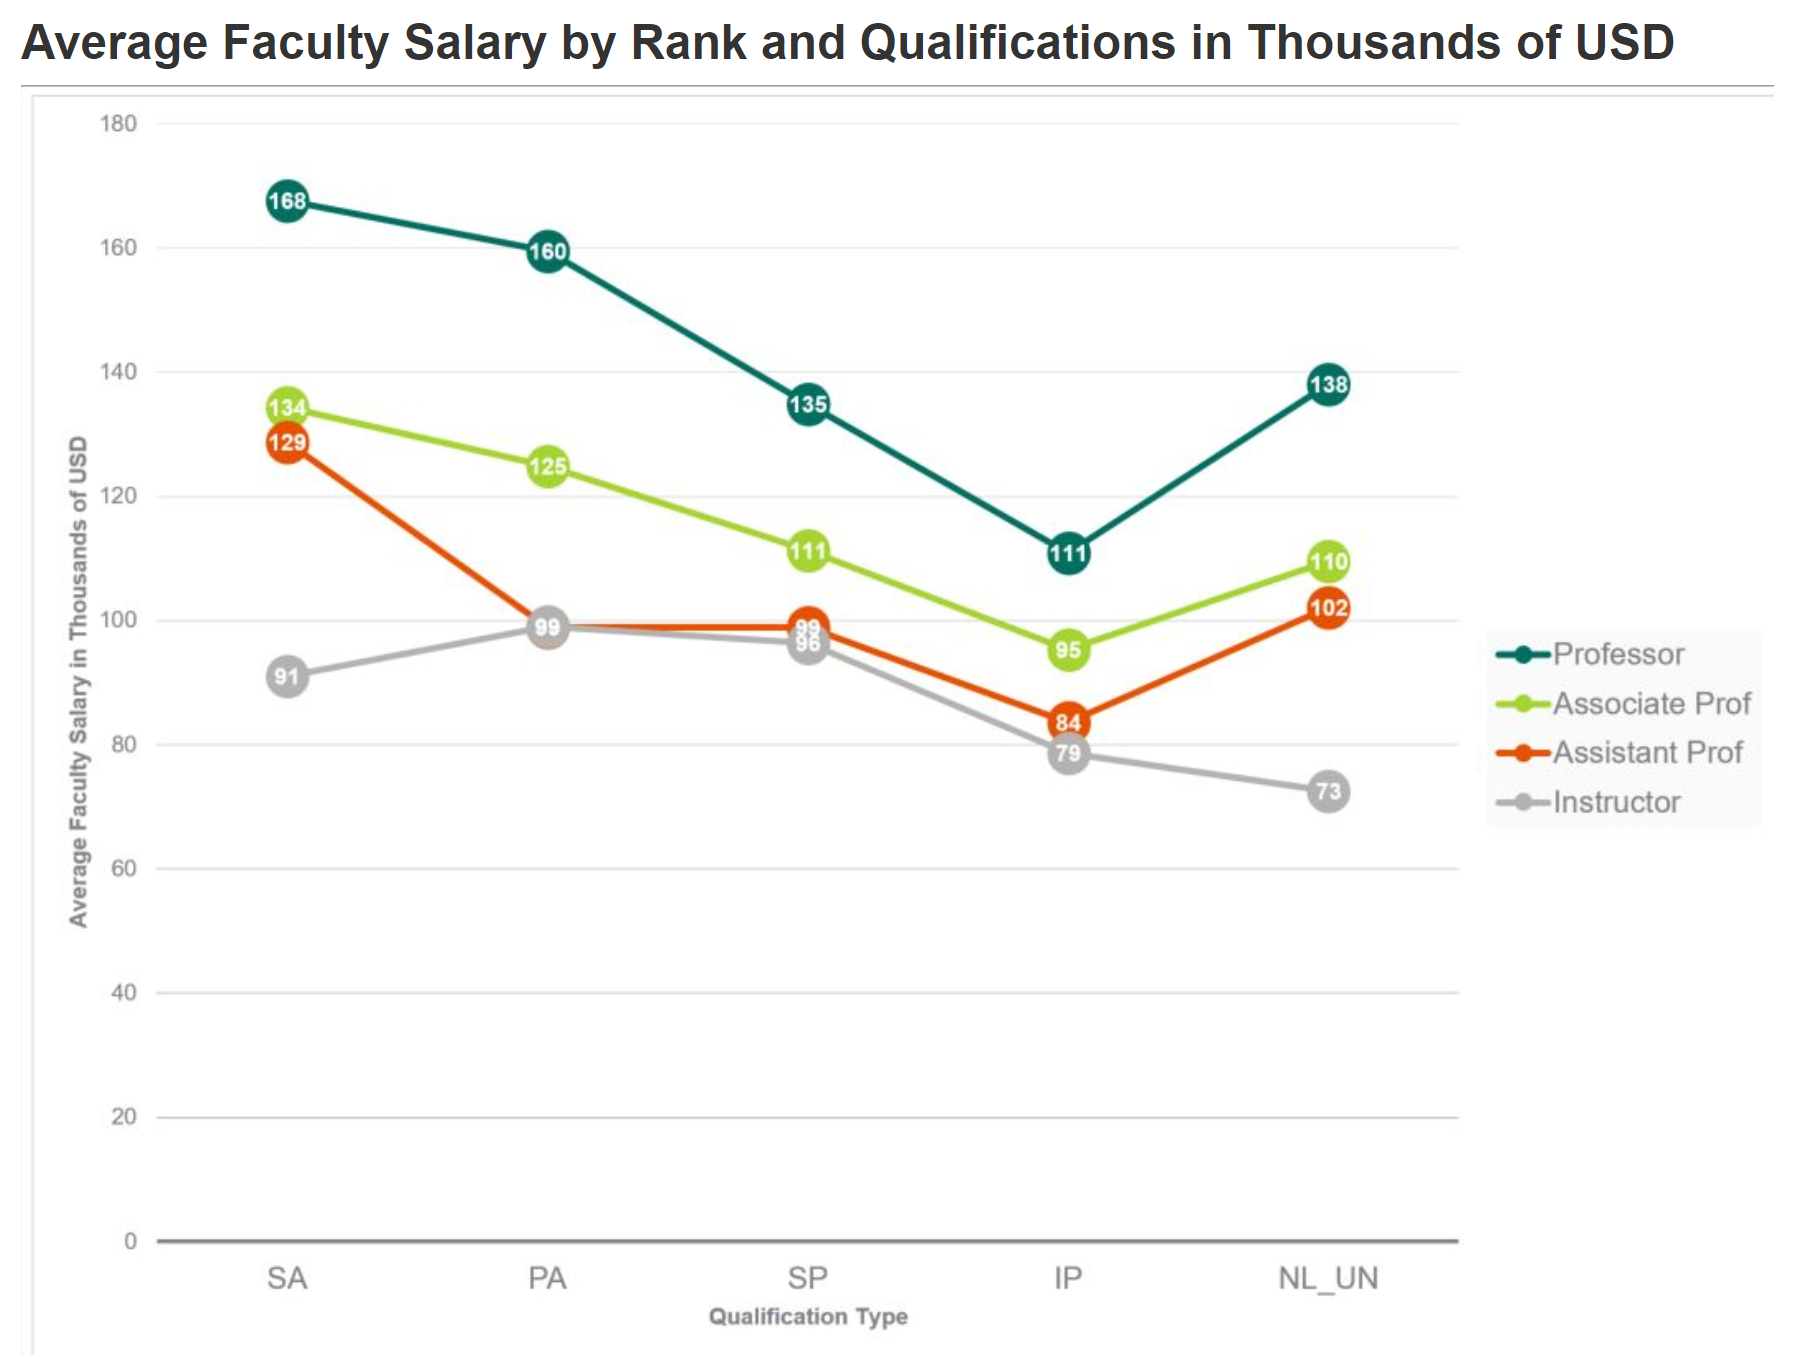 2018–19 Staff Compensation & Demographics Survey (SCDS), Average Faculty Salary by Rank and Qualification